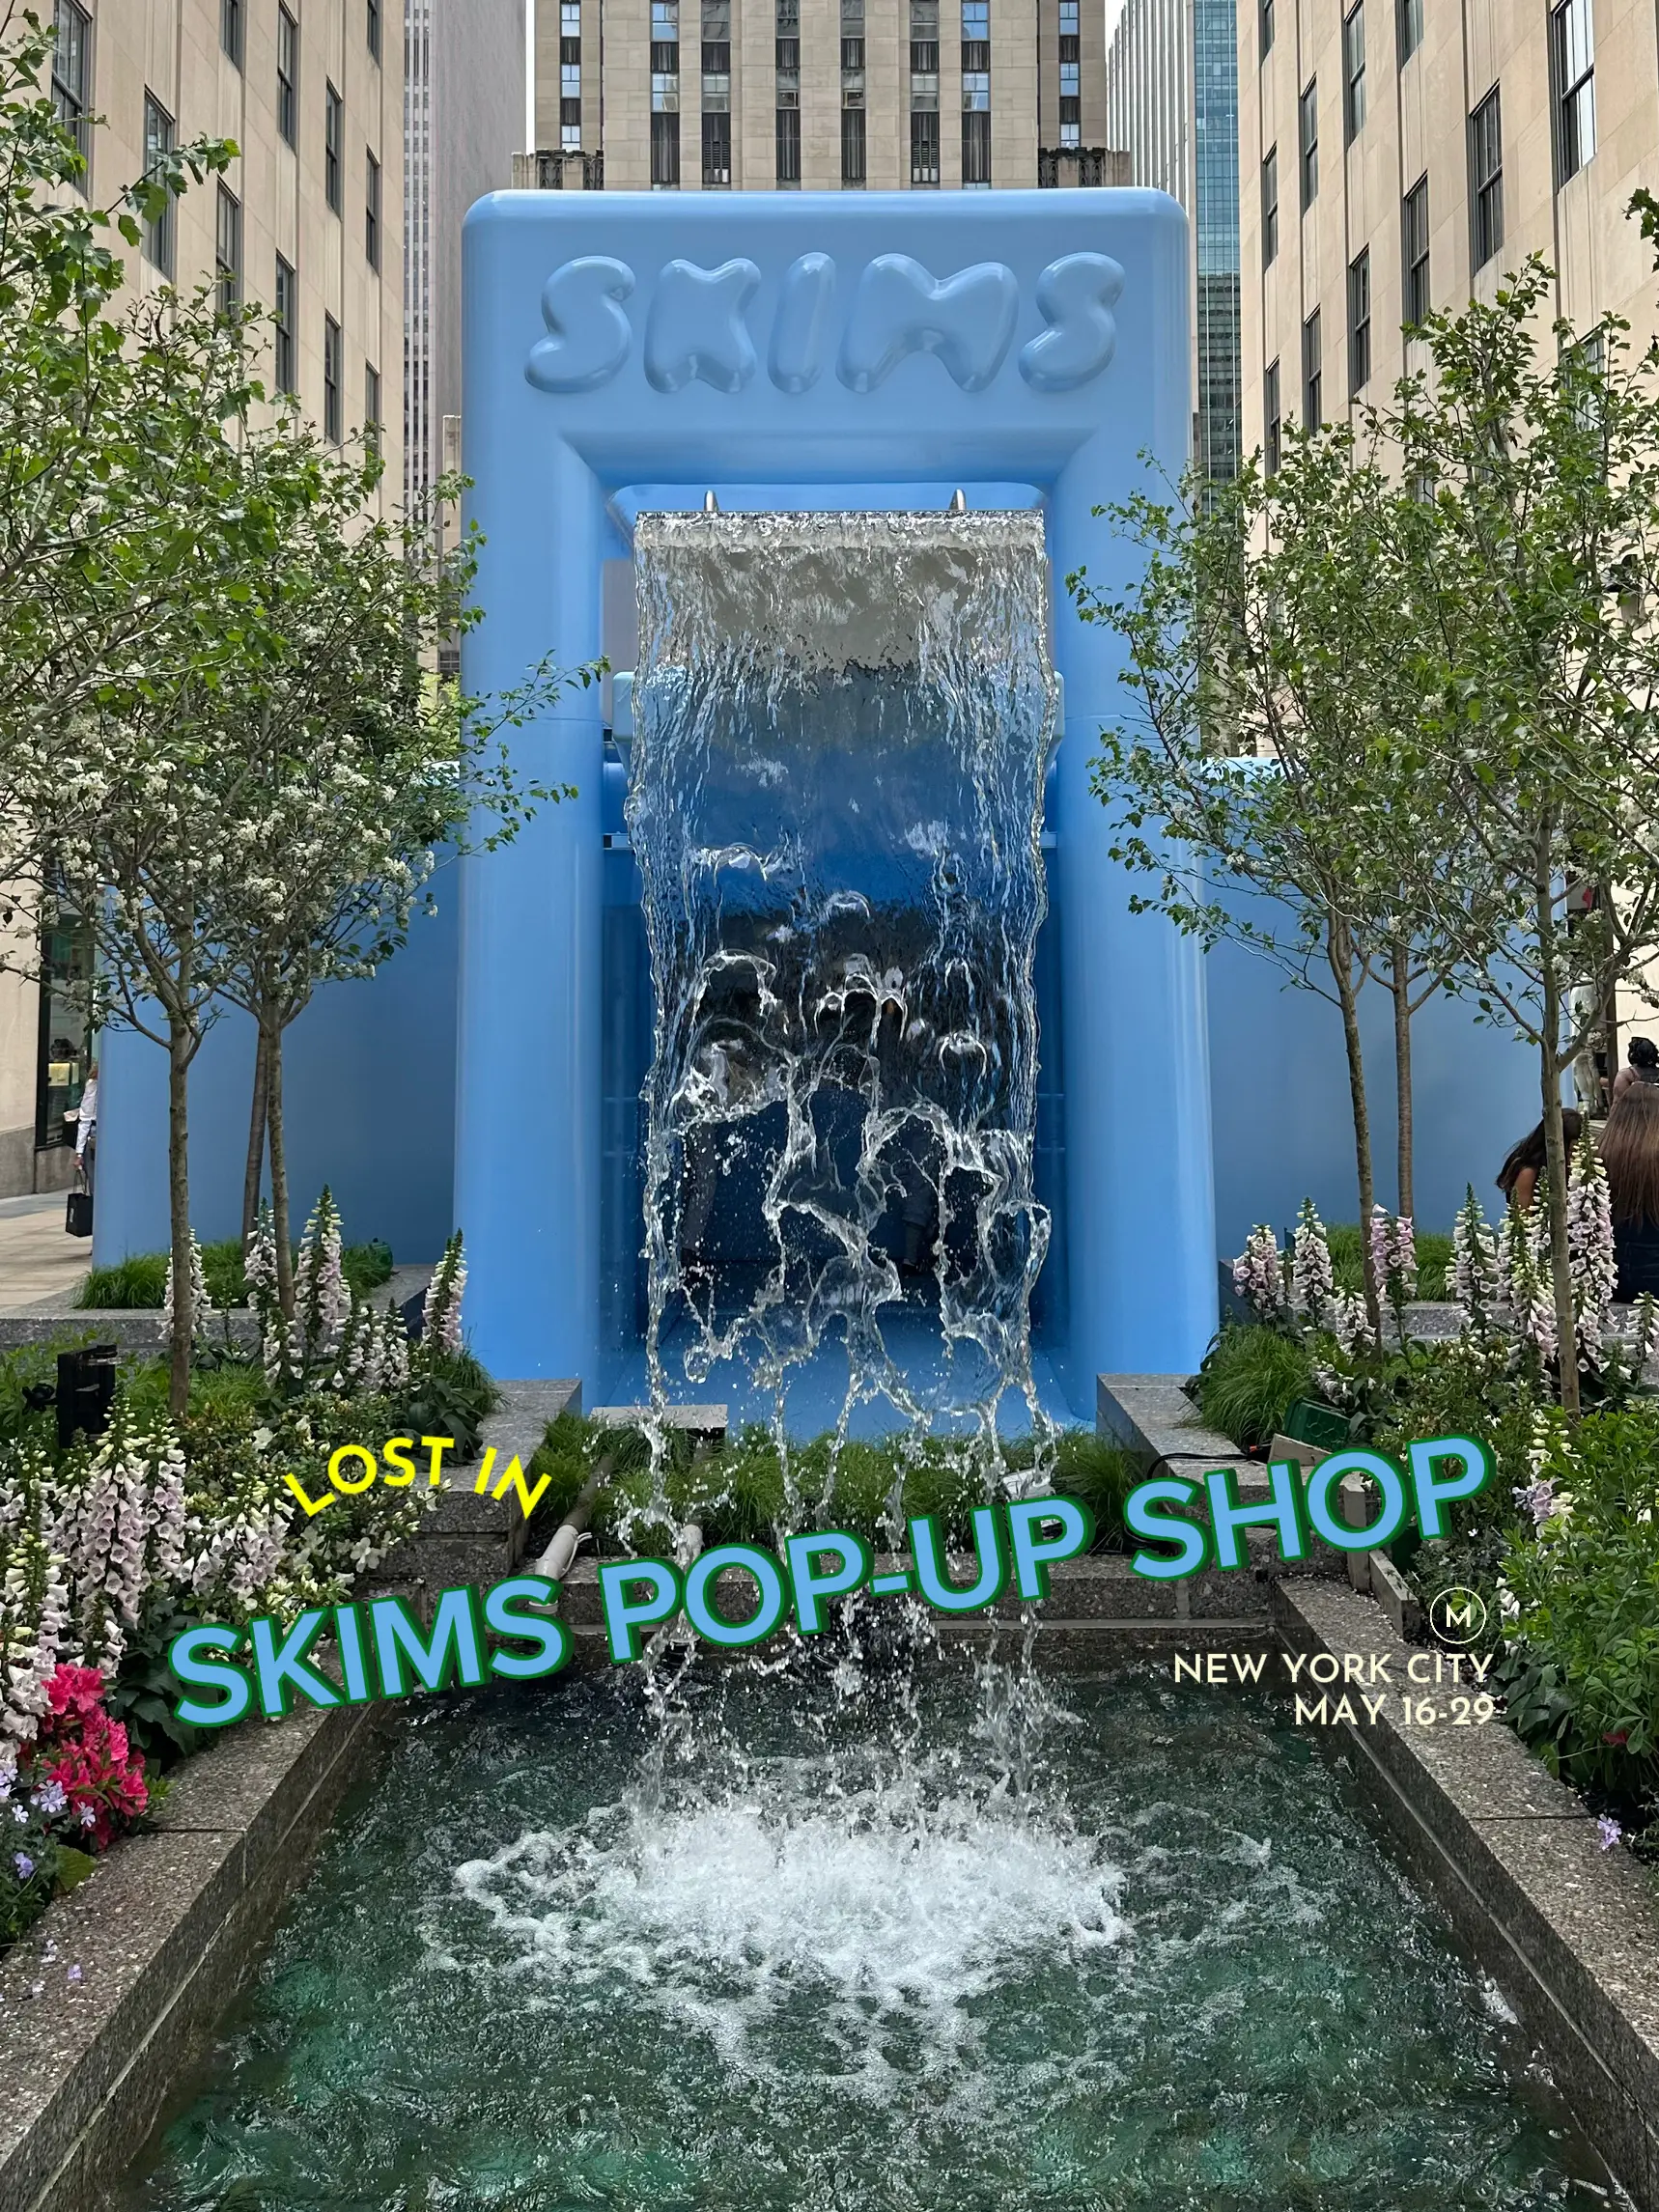 SKIMS POP-UP SHOP: Inside Look  Gallery posted by Rebeka ✨ NYC